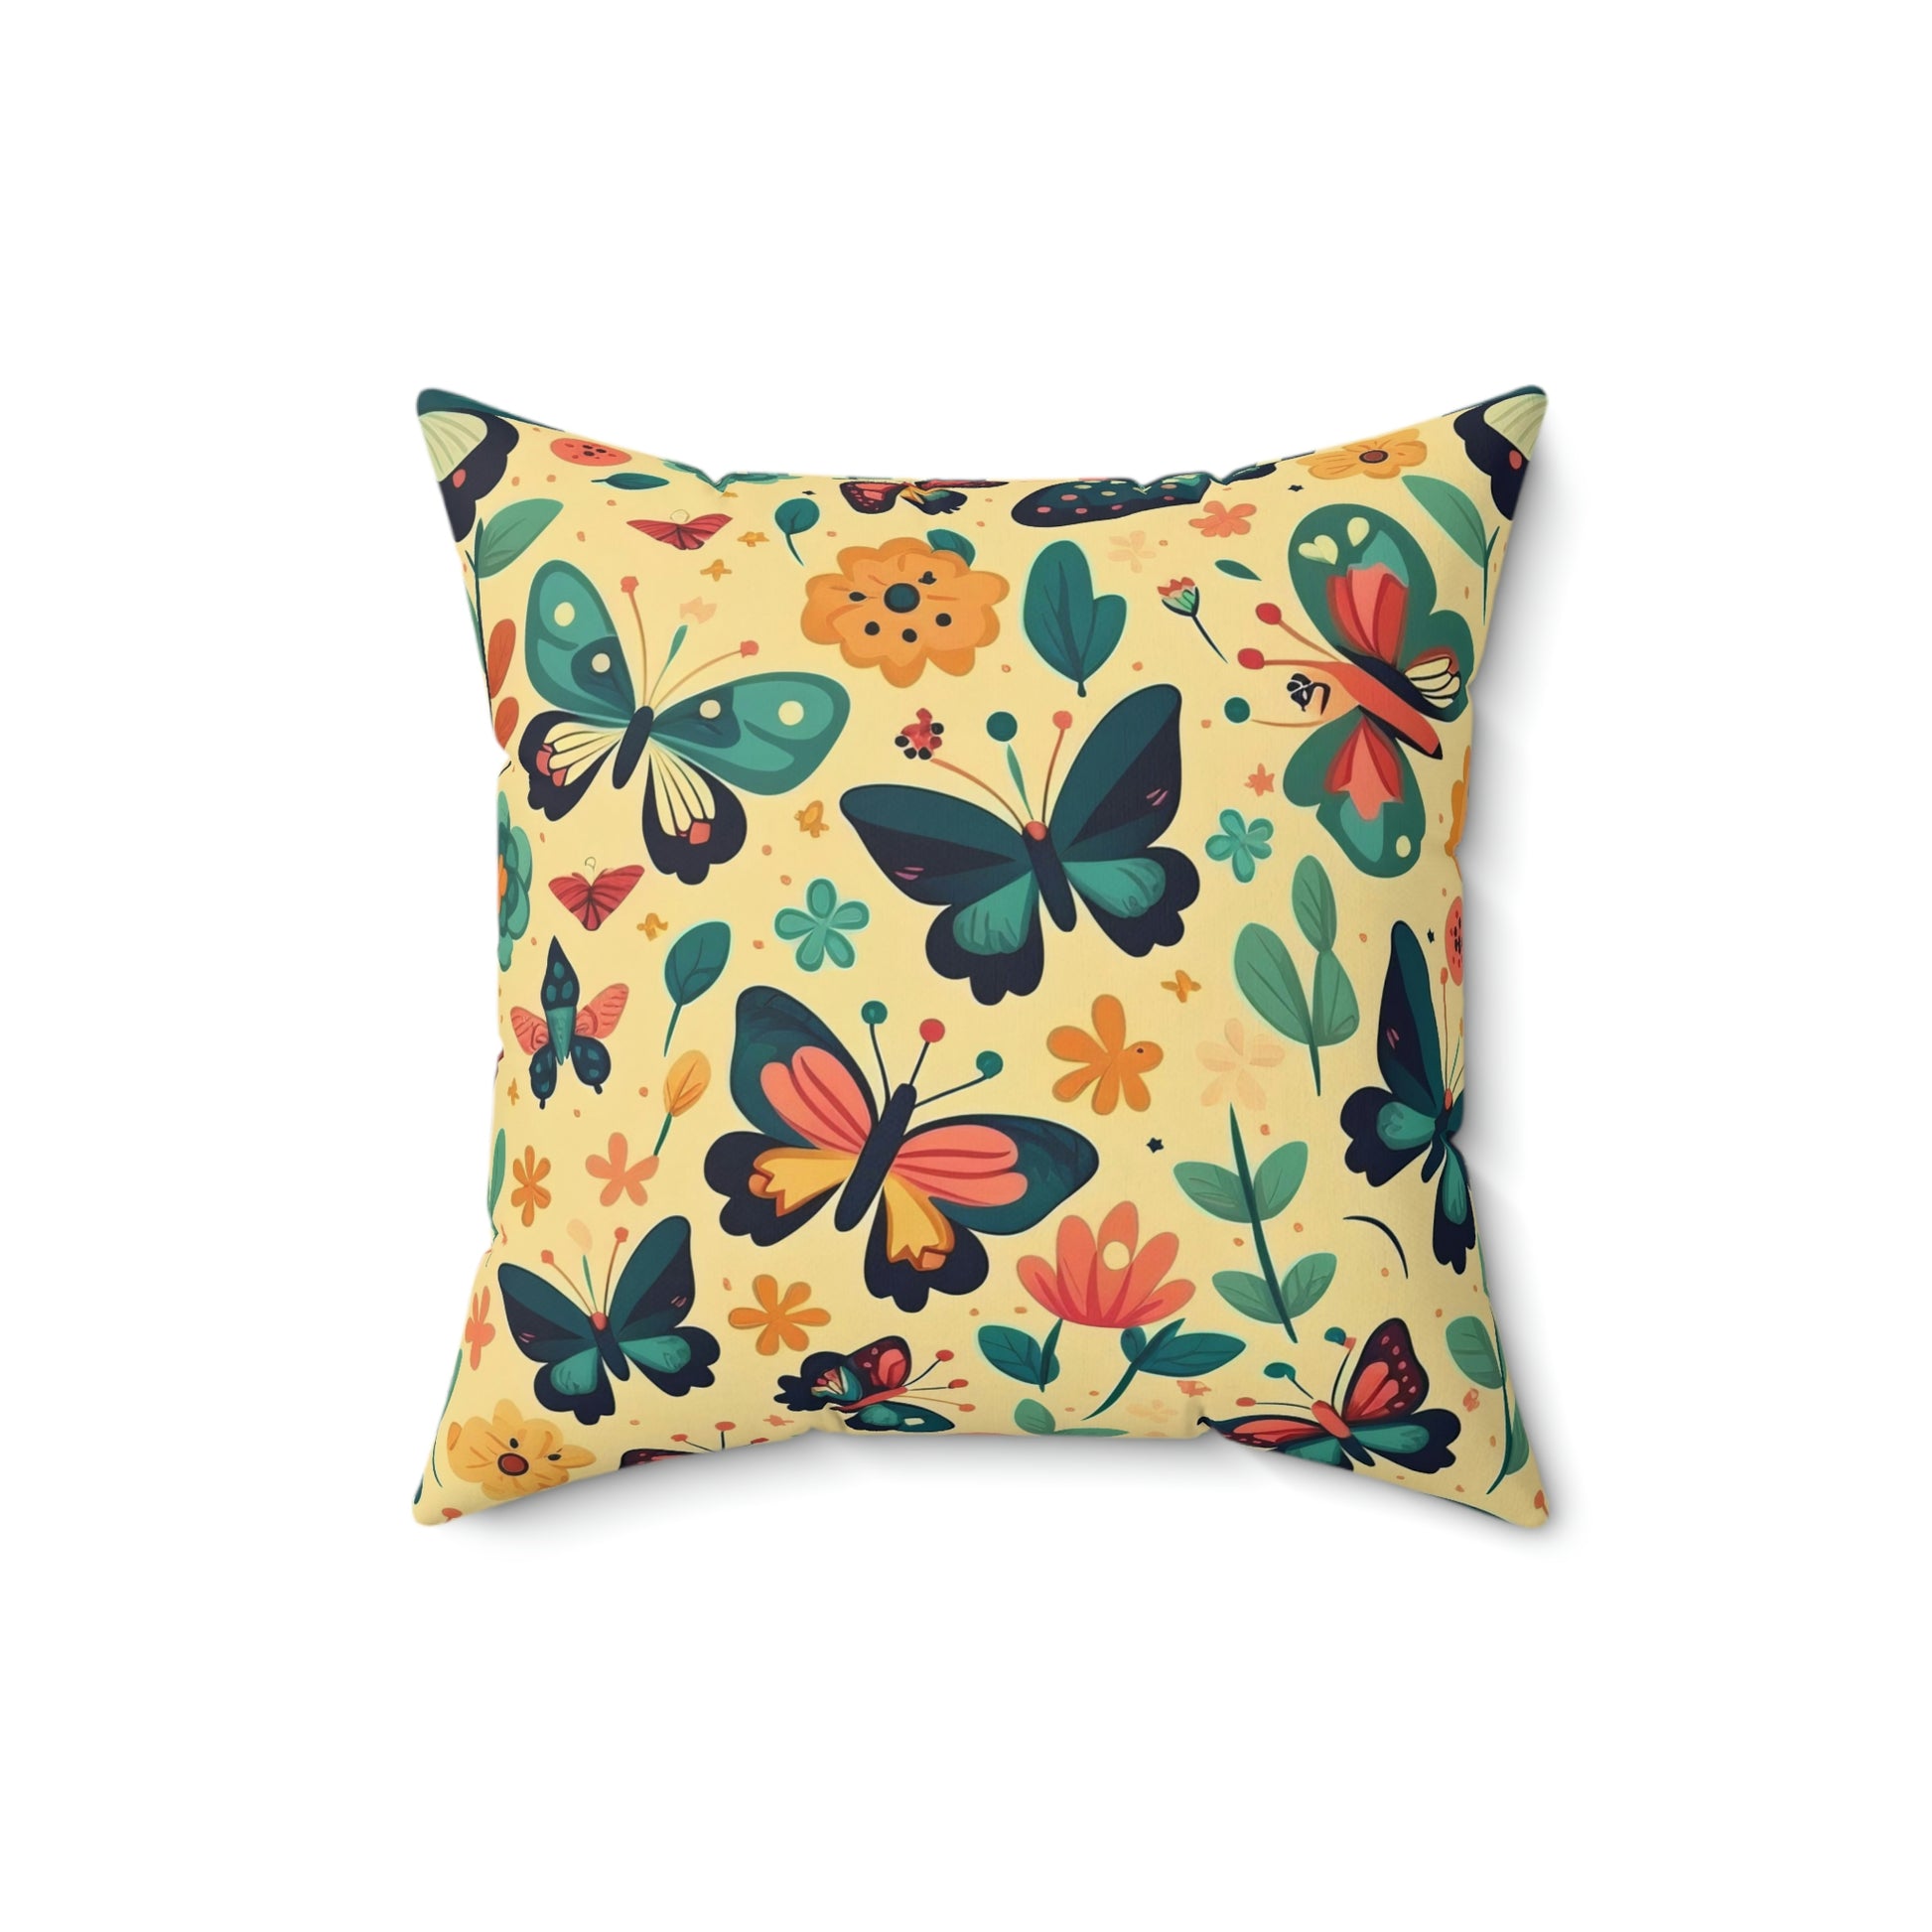 Butterfly Blue and Yellow floral accent throw pillow on a couch, Butterfly Blue and Yellow botanical couch pillow on a chair, Butterfly Blue and Yellow floral pattern pillow on a lounger, Butterfly Blue and Yellow spring garden floral decorative pillow on a bed